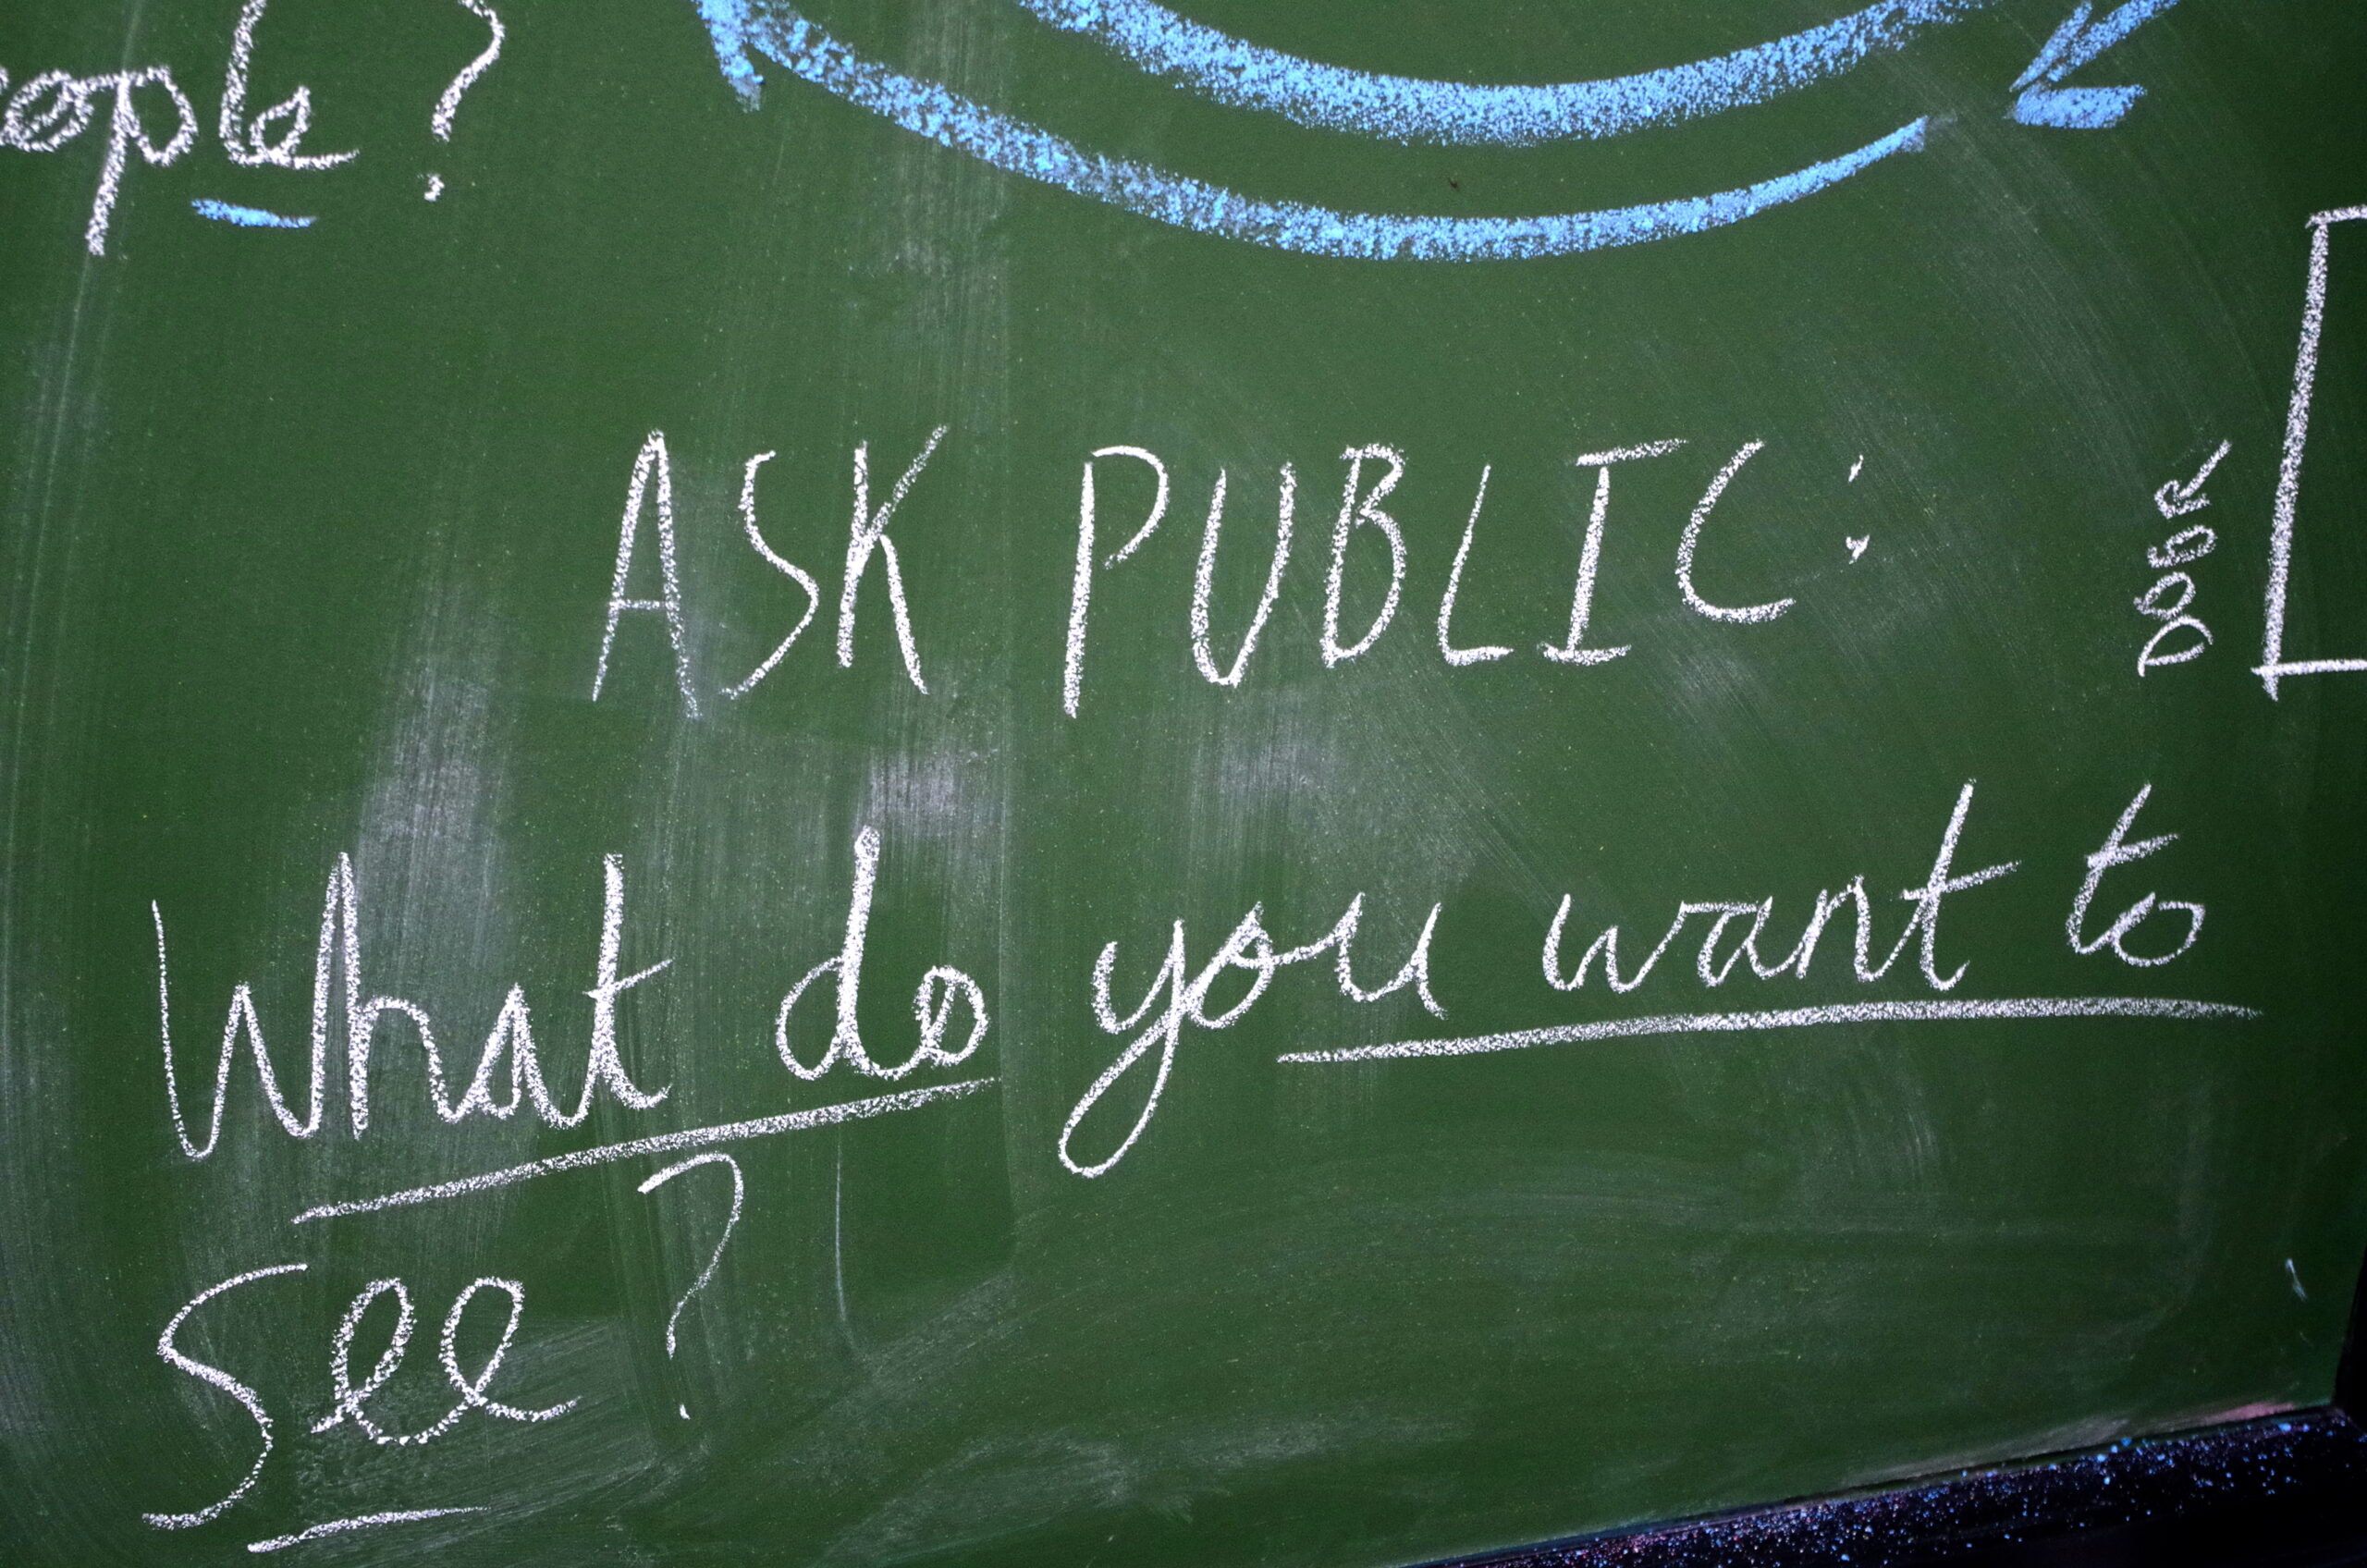 Green chalkboard with writing reading 'Ask Public What do you want to see?'